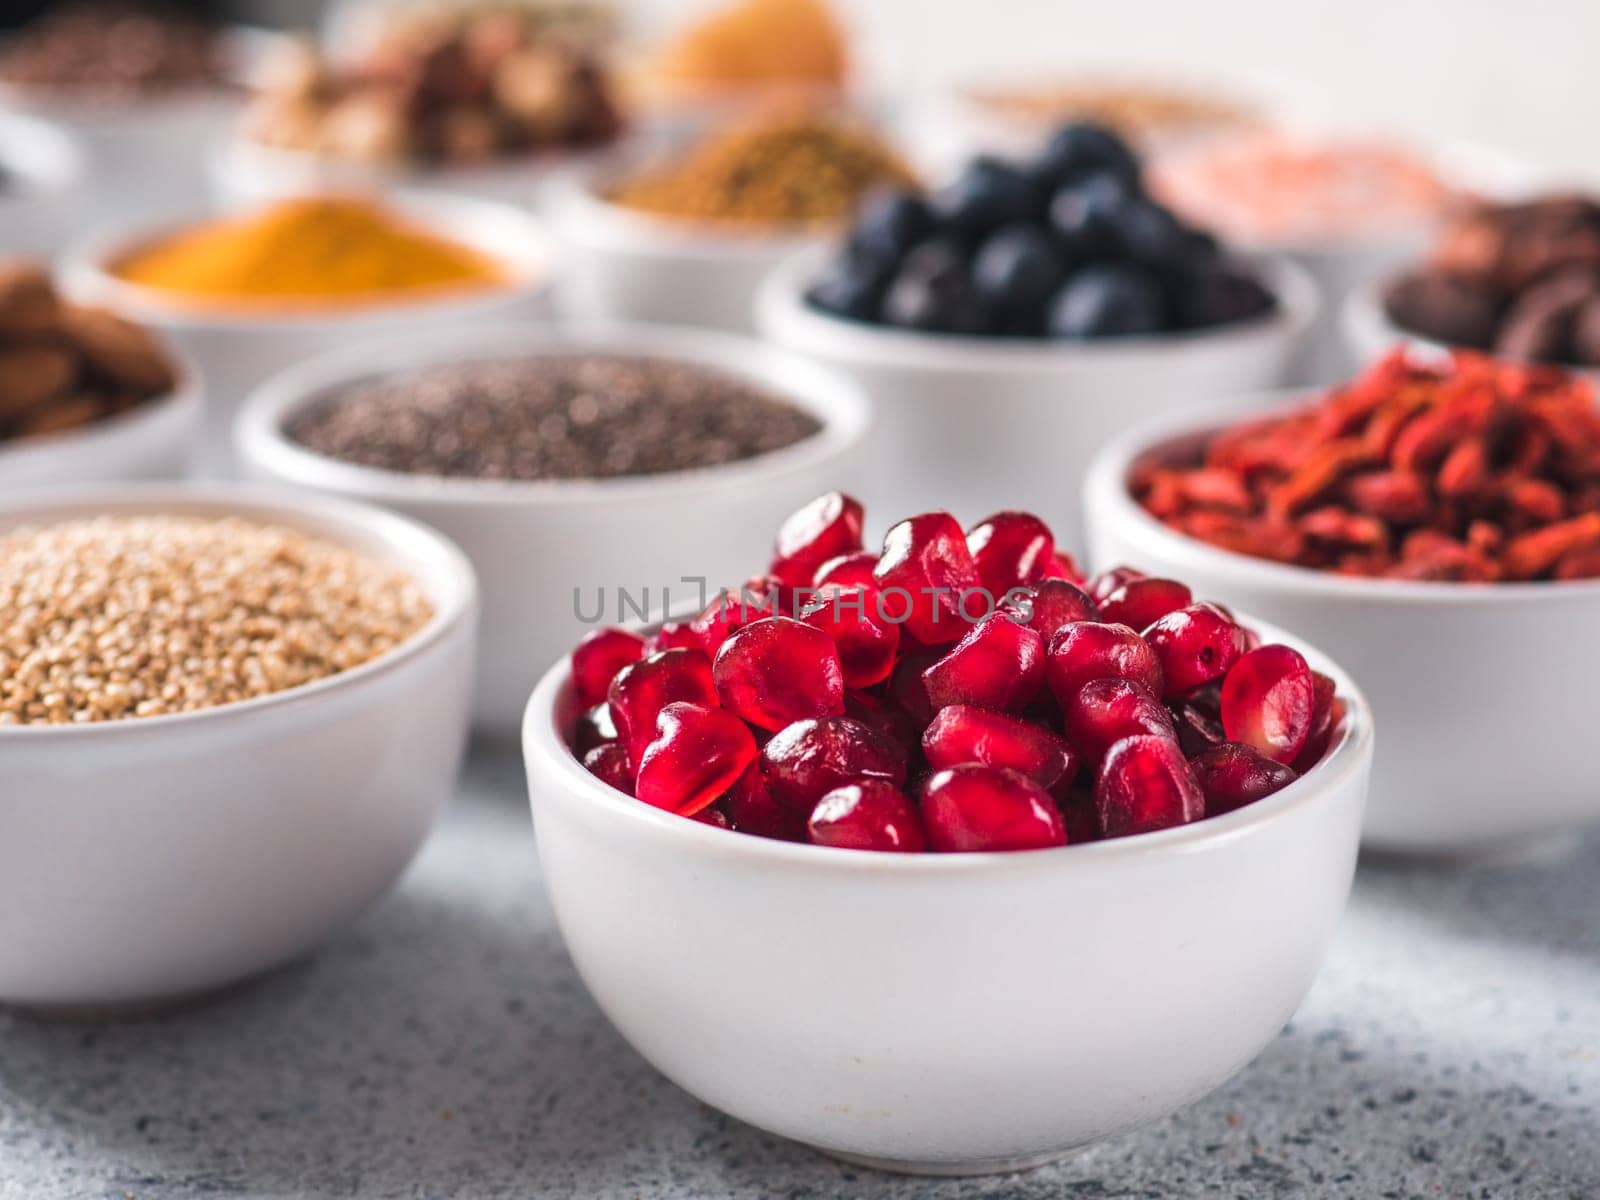 pomegranate or grain of garnet in small white bowl and other superfoods on background. Selective focus. Different superfoods ingredients. Concept and illustration for superfood and detox food